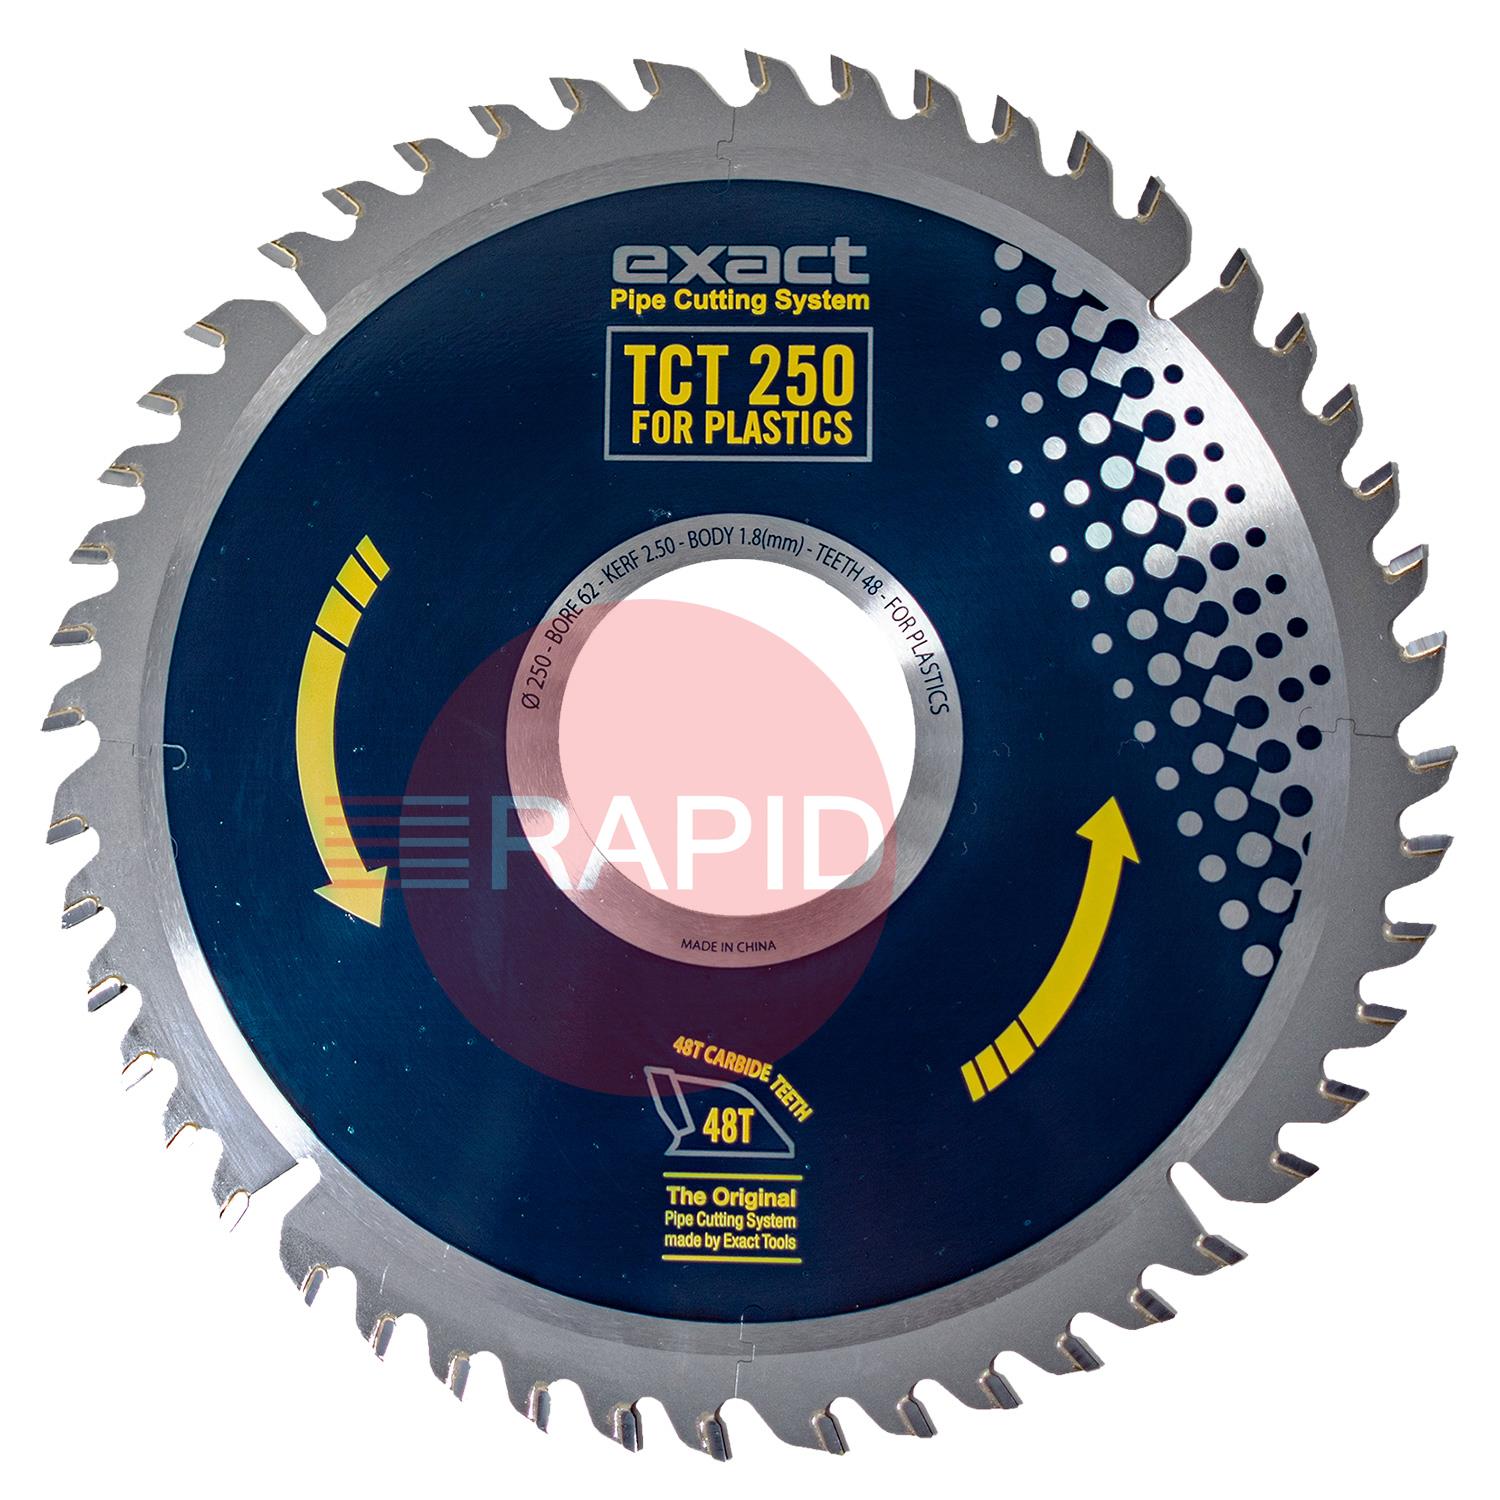 7010460  Exact TCT P250 Saw Blade, for Plastic